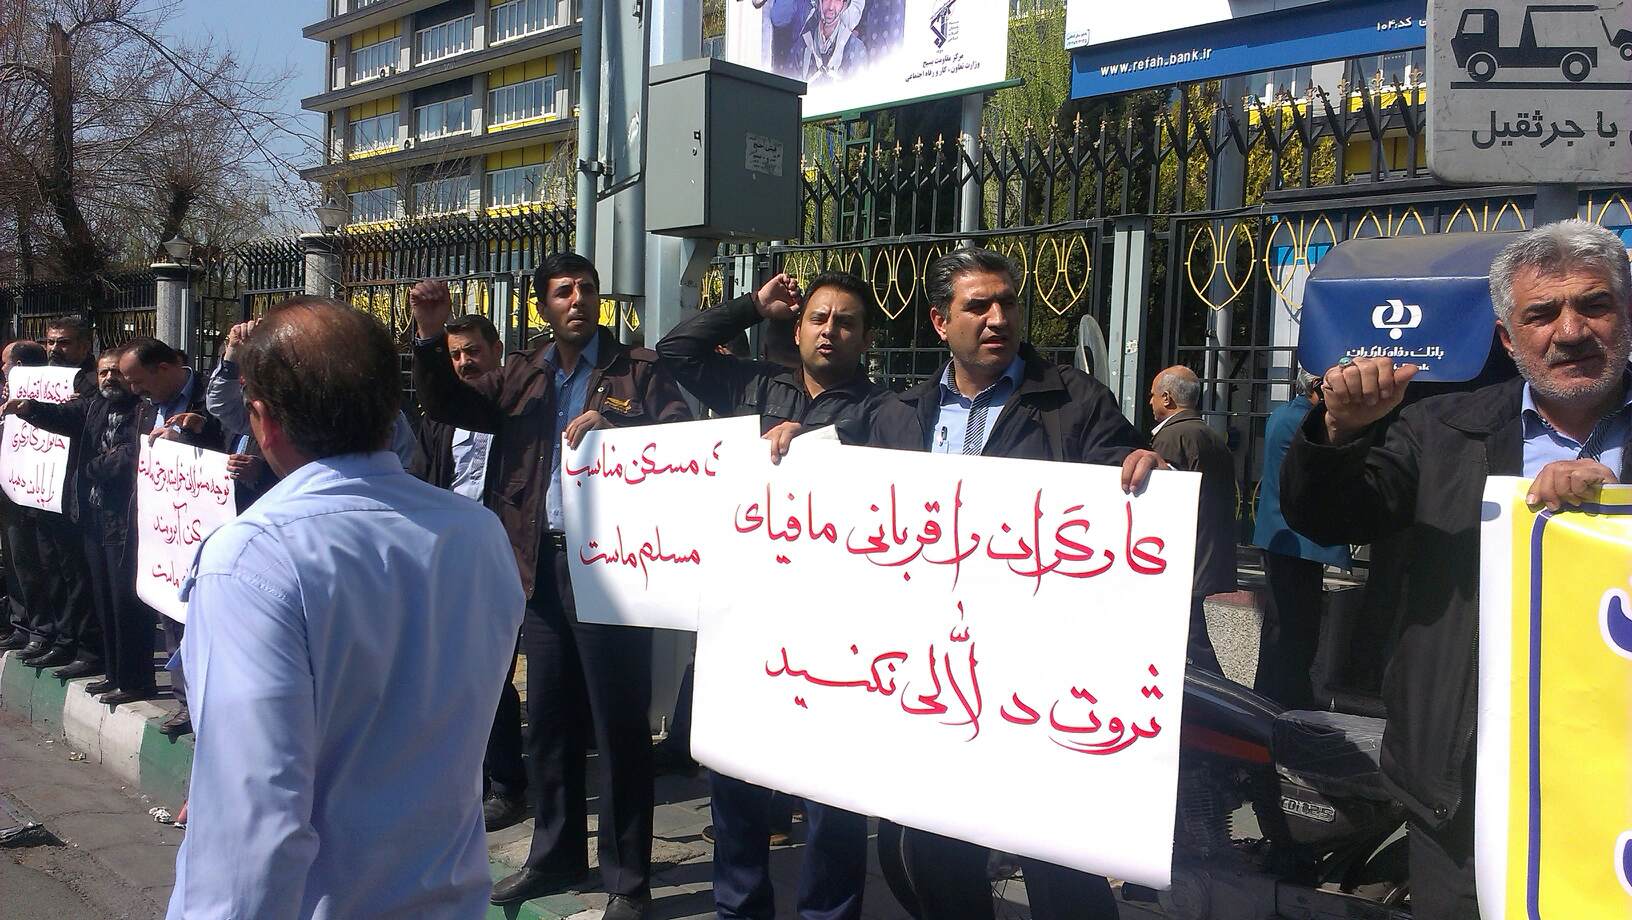 Bus drivers in Tehran protest against poverty and imposition of inhuman conditions on them